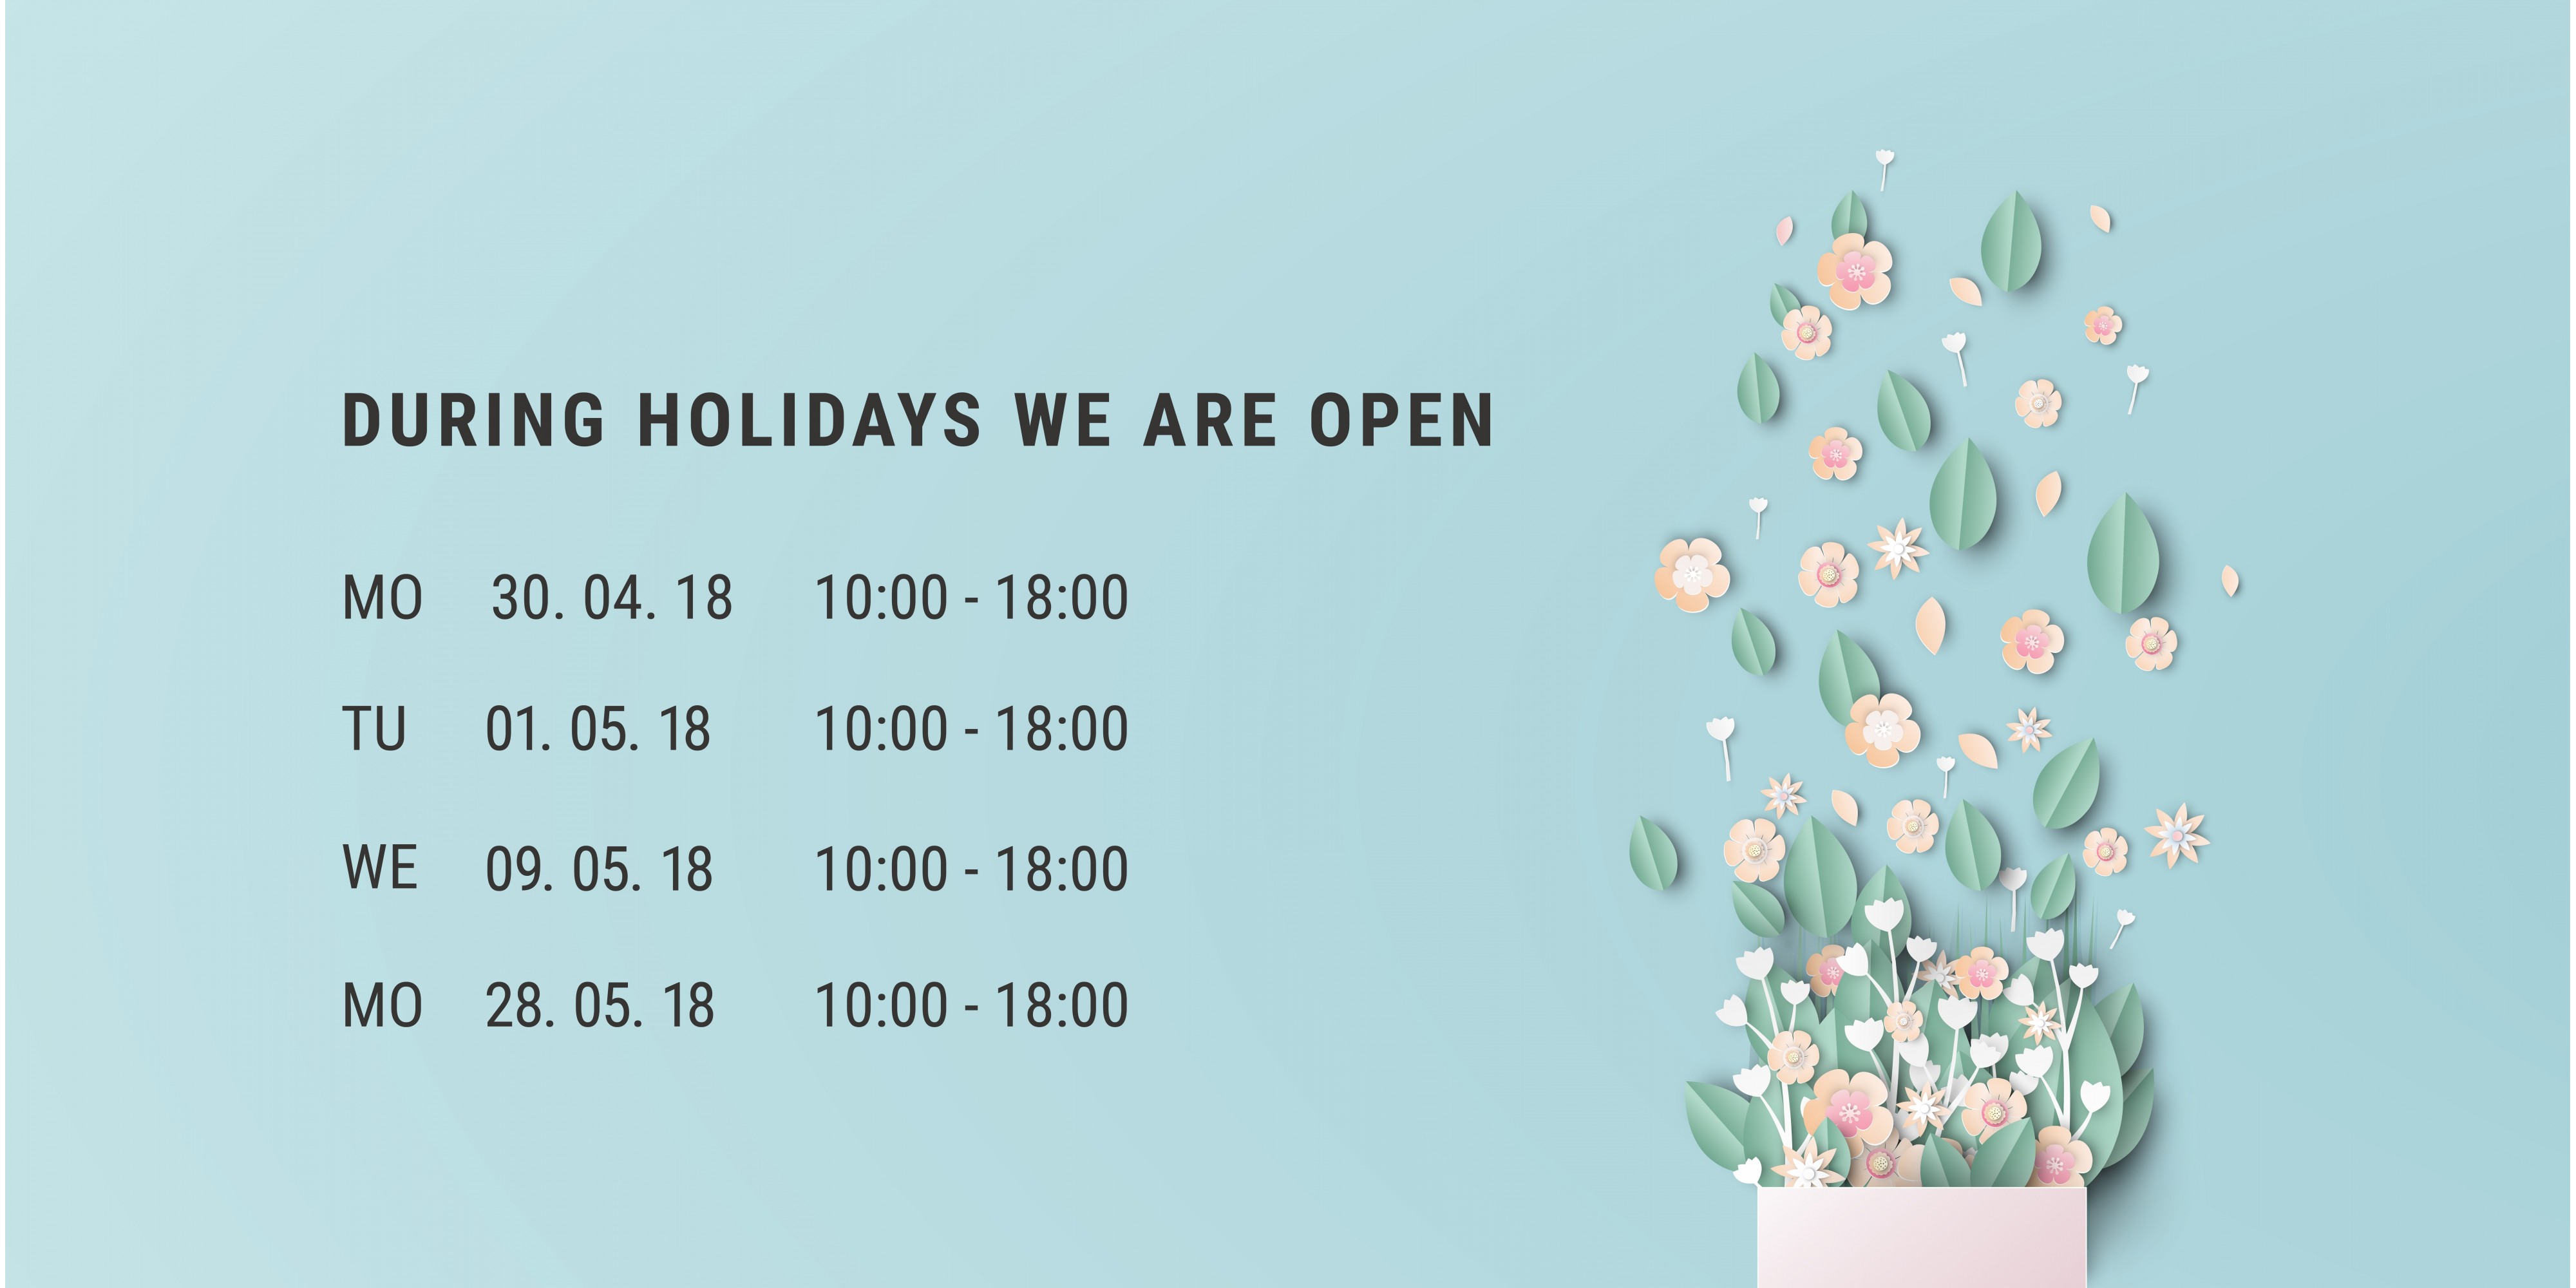 During holidays we are open